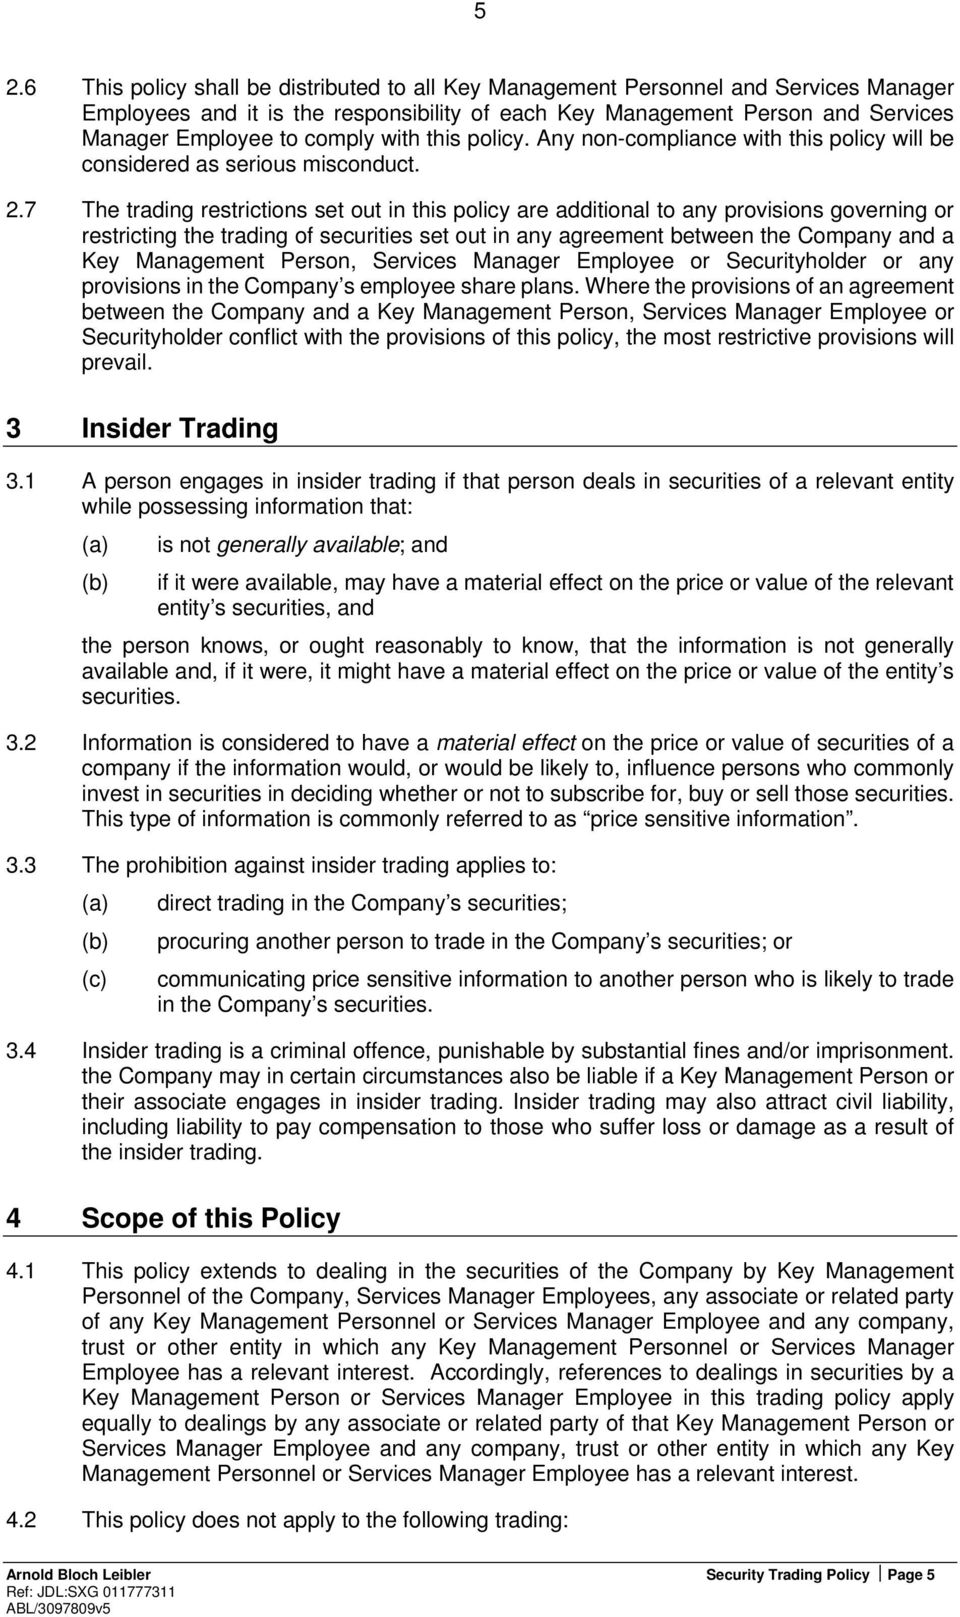 7 The trading restrictions set out in this policy are additional to any provisions governing or restricting the trading of securities set out in any agreement between the Company and a Key Management